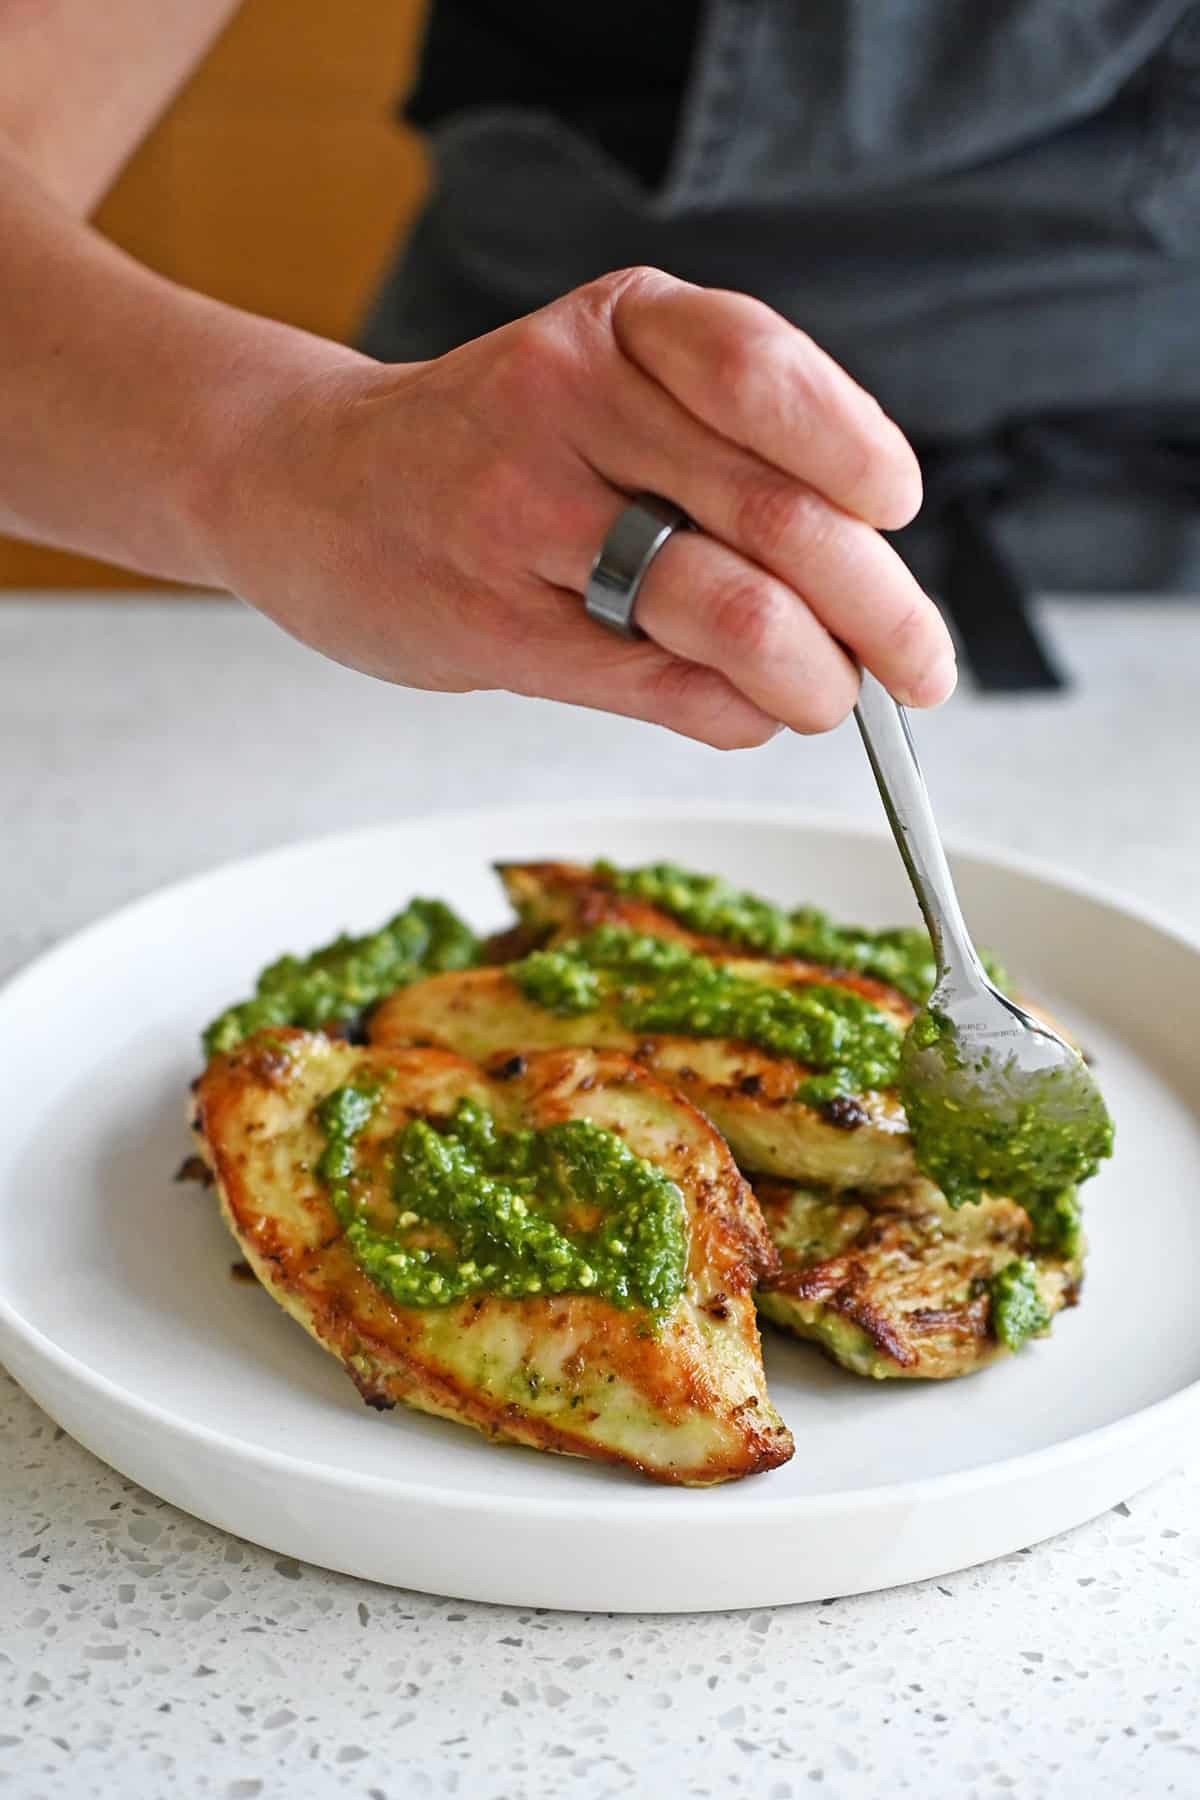 Spooning pesto onto a plate filled with pesto chicken cutlets right before serving.